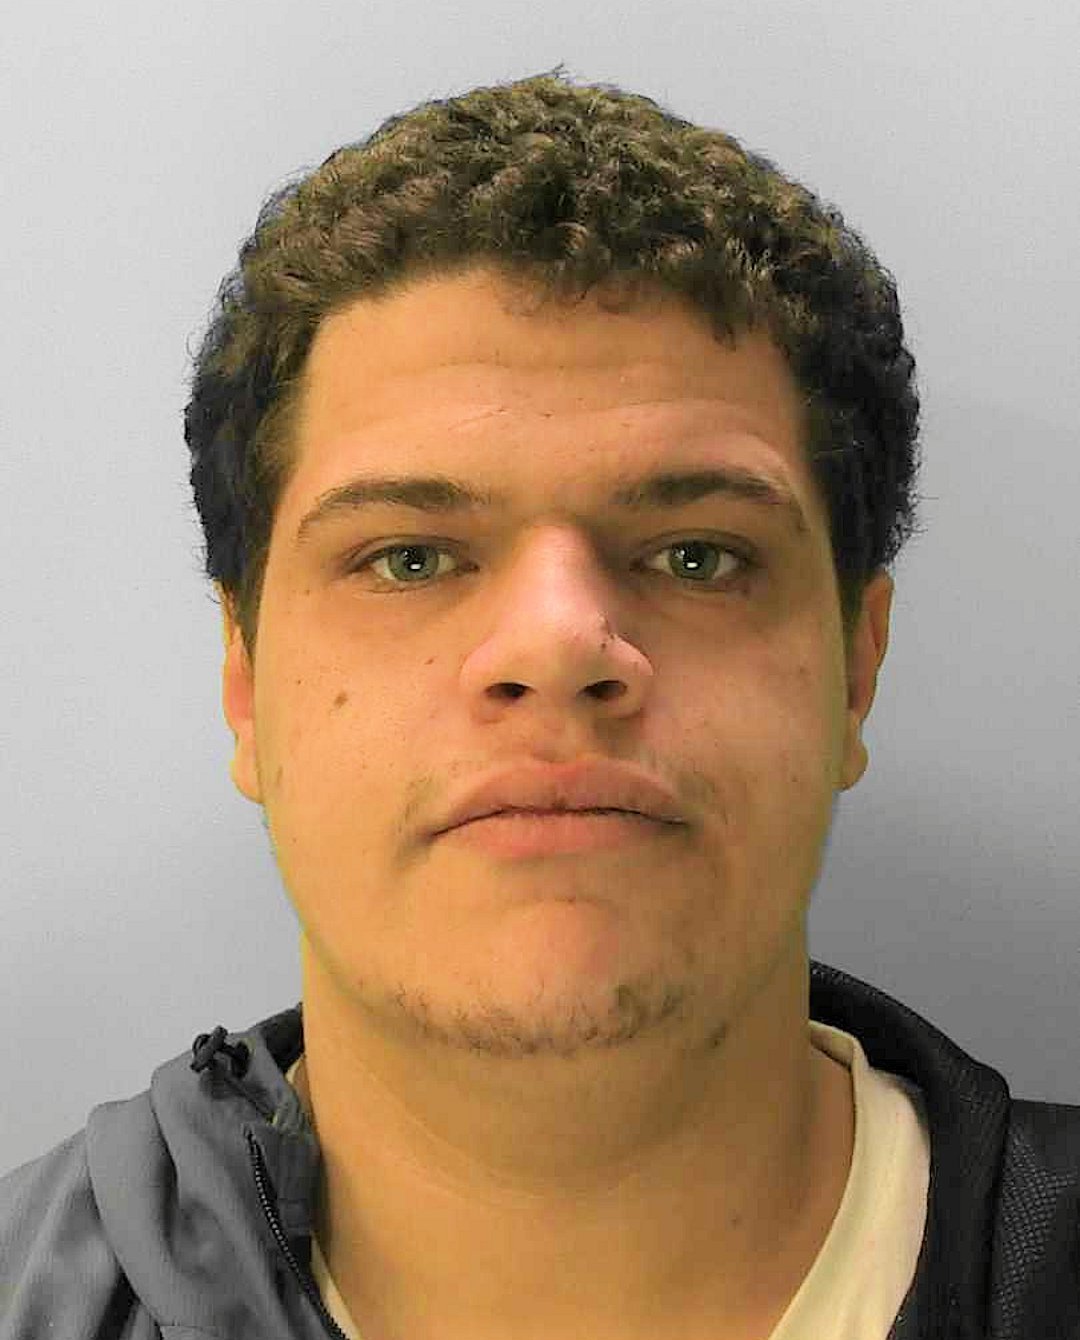 James Sanders stuffed crack cocaine up his bum in Eastbourne to try to hide evidence of his drug deals from police